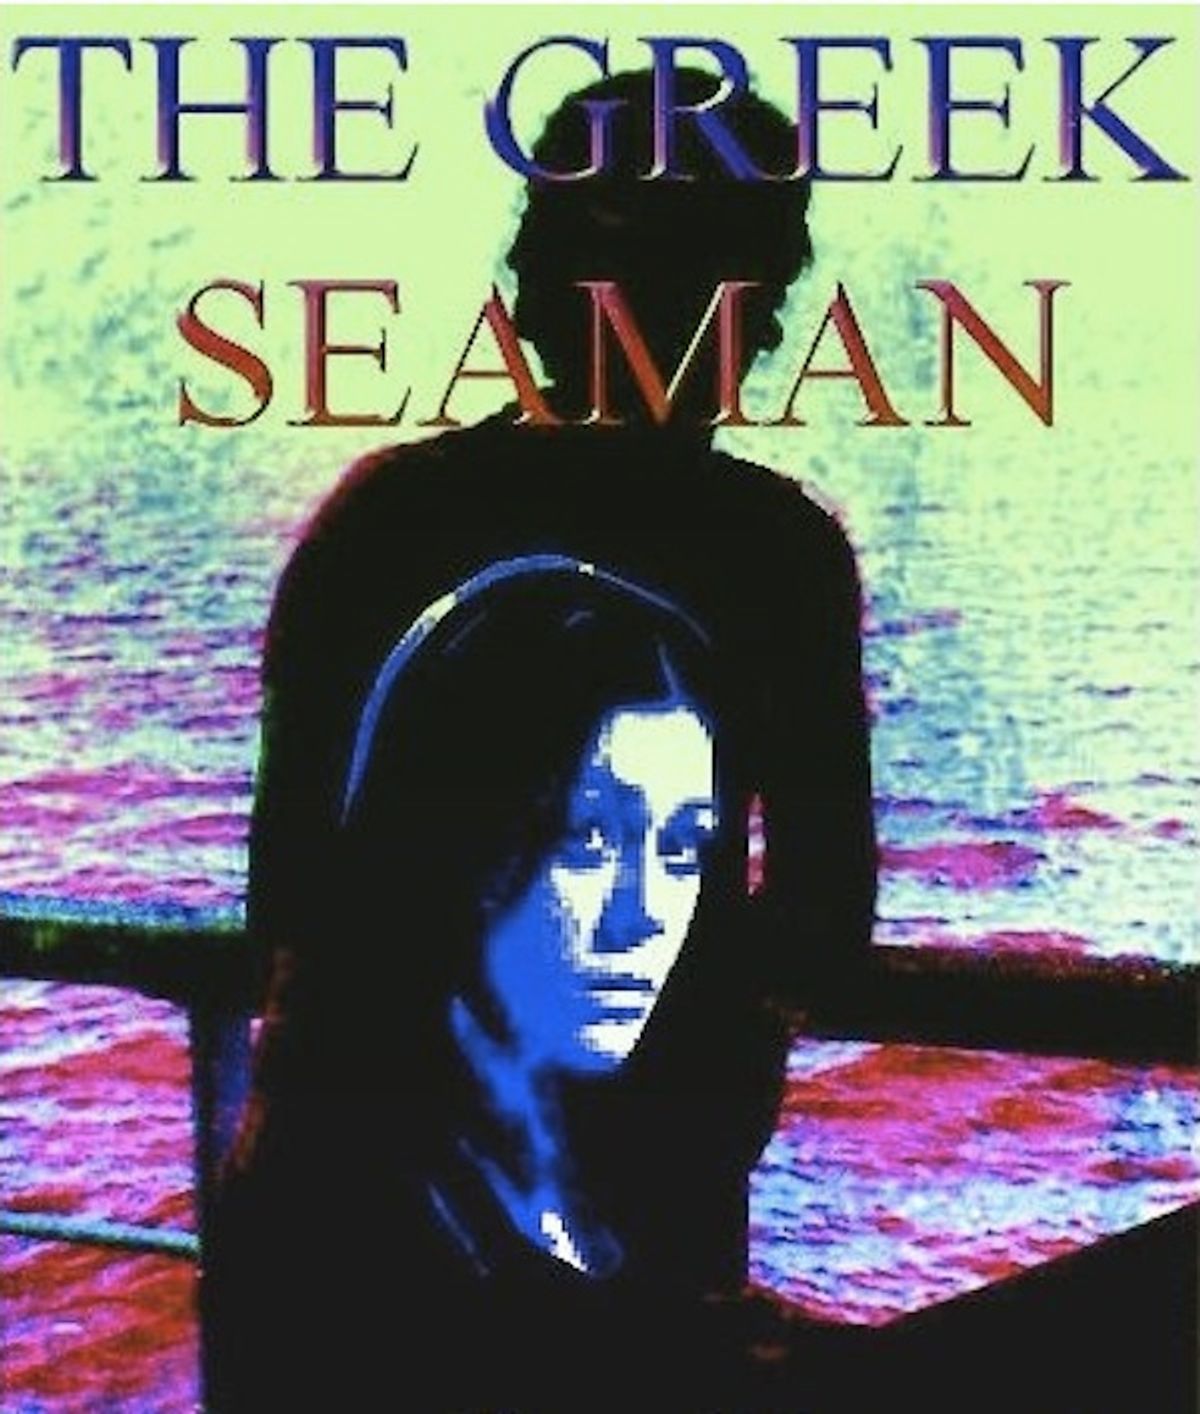 The cover of the "The Greek Seaman"